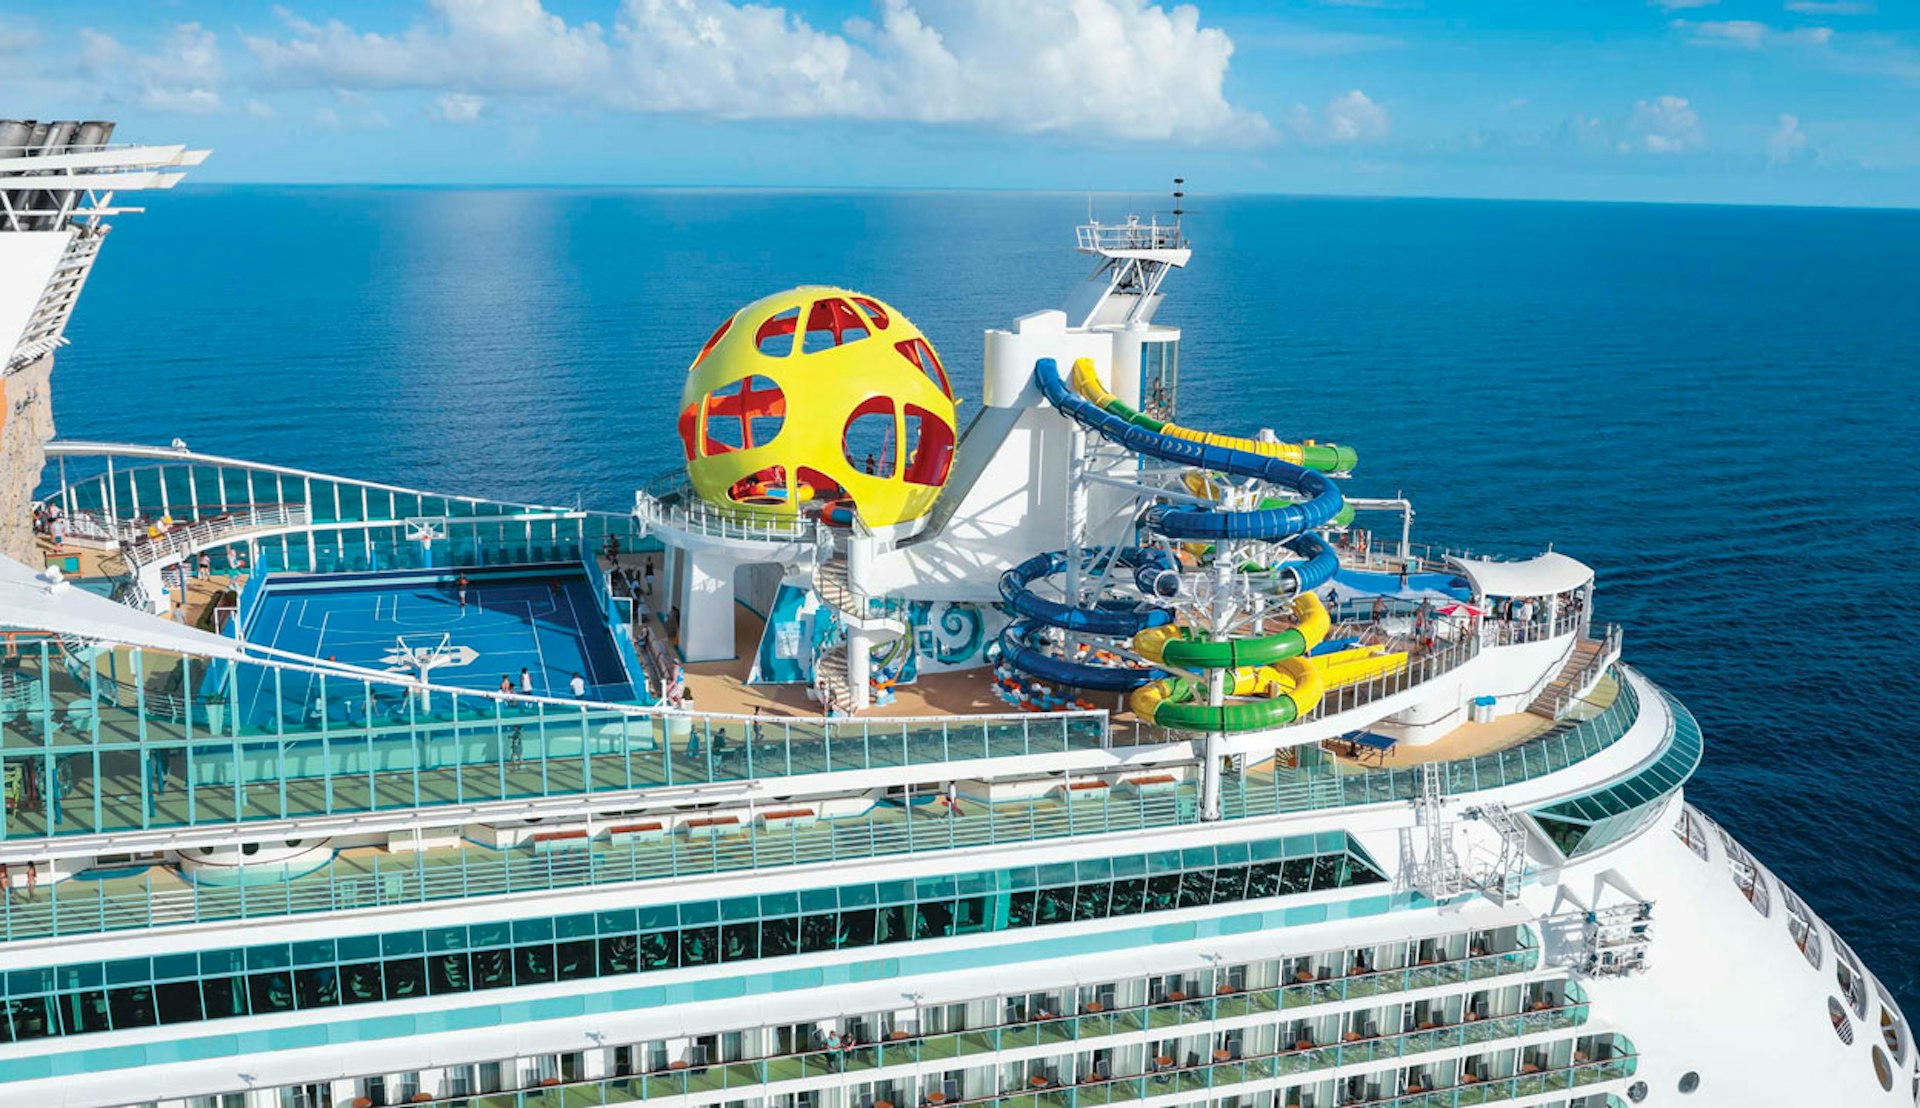 voyager class ships on royal caribbean